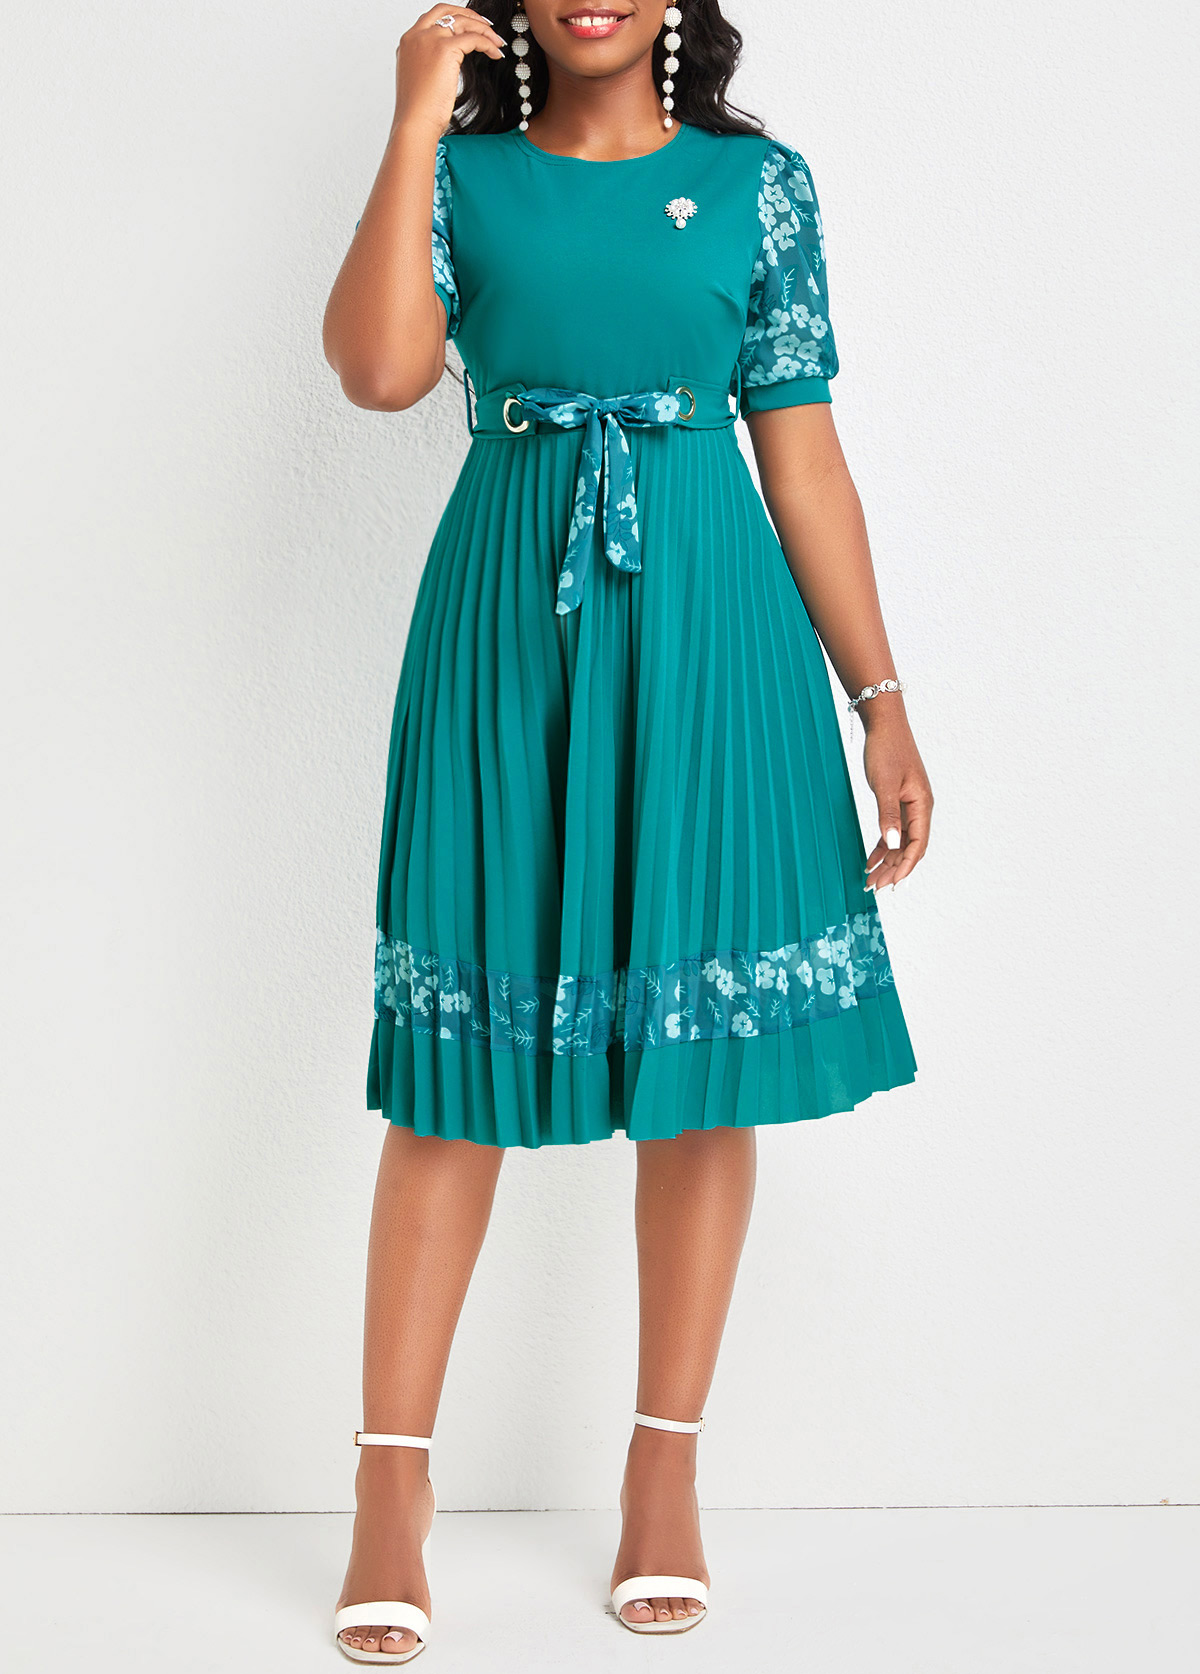 ROTITA Pleated Floral Print Turquoise Belted Round Neck Dress | Rotita ...